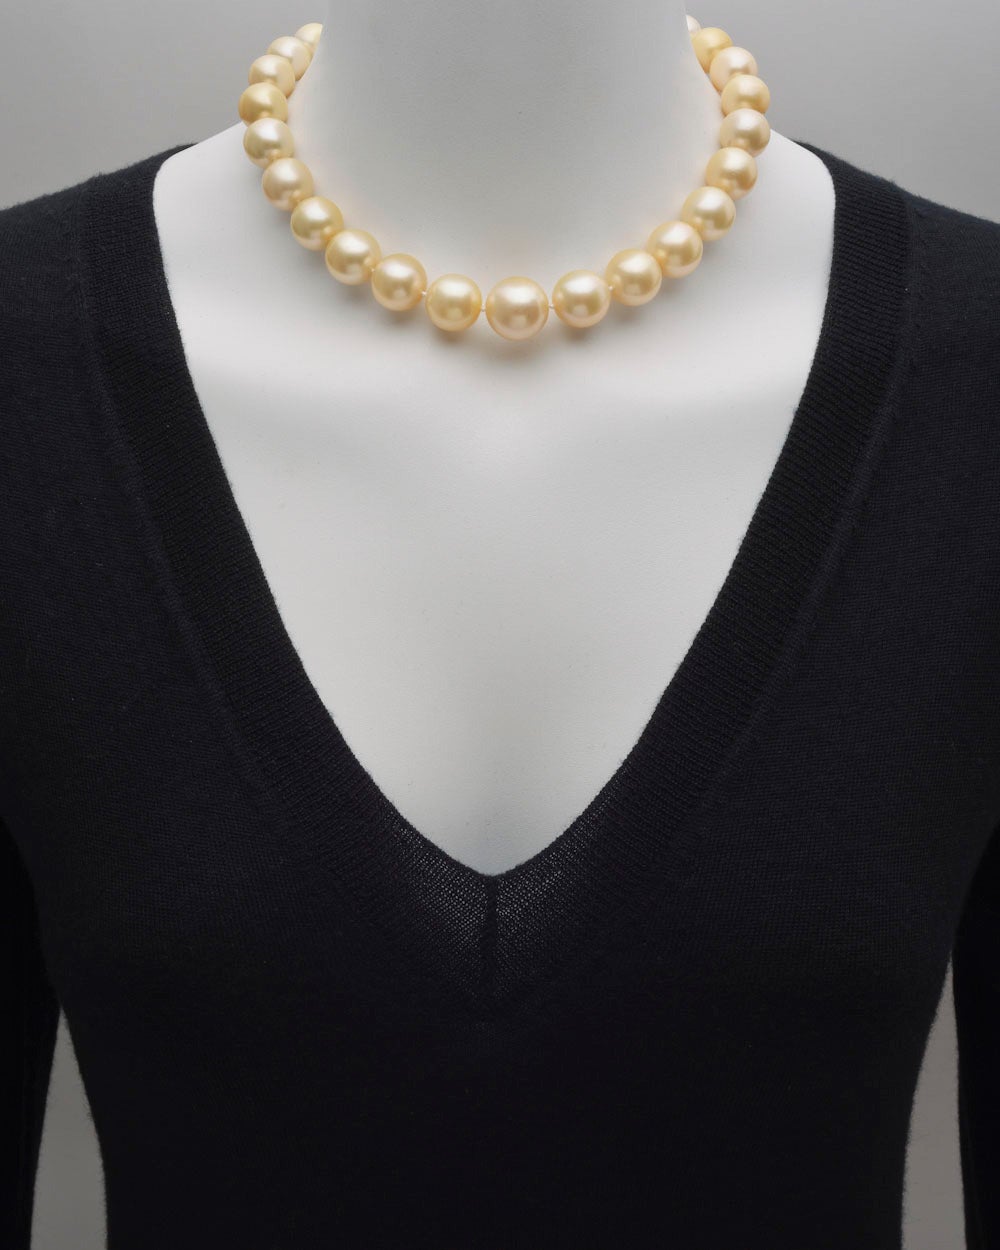 Cultured yellow South Sea pearl necklace, composed of 28 pearls ranging from 11 to 16.5mm in diameter, strung on a hand-knotted silk cord, with a platinum screw-in ball clasp pave-set with round diamonds. 16.5